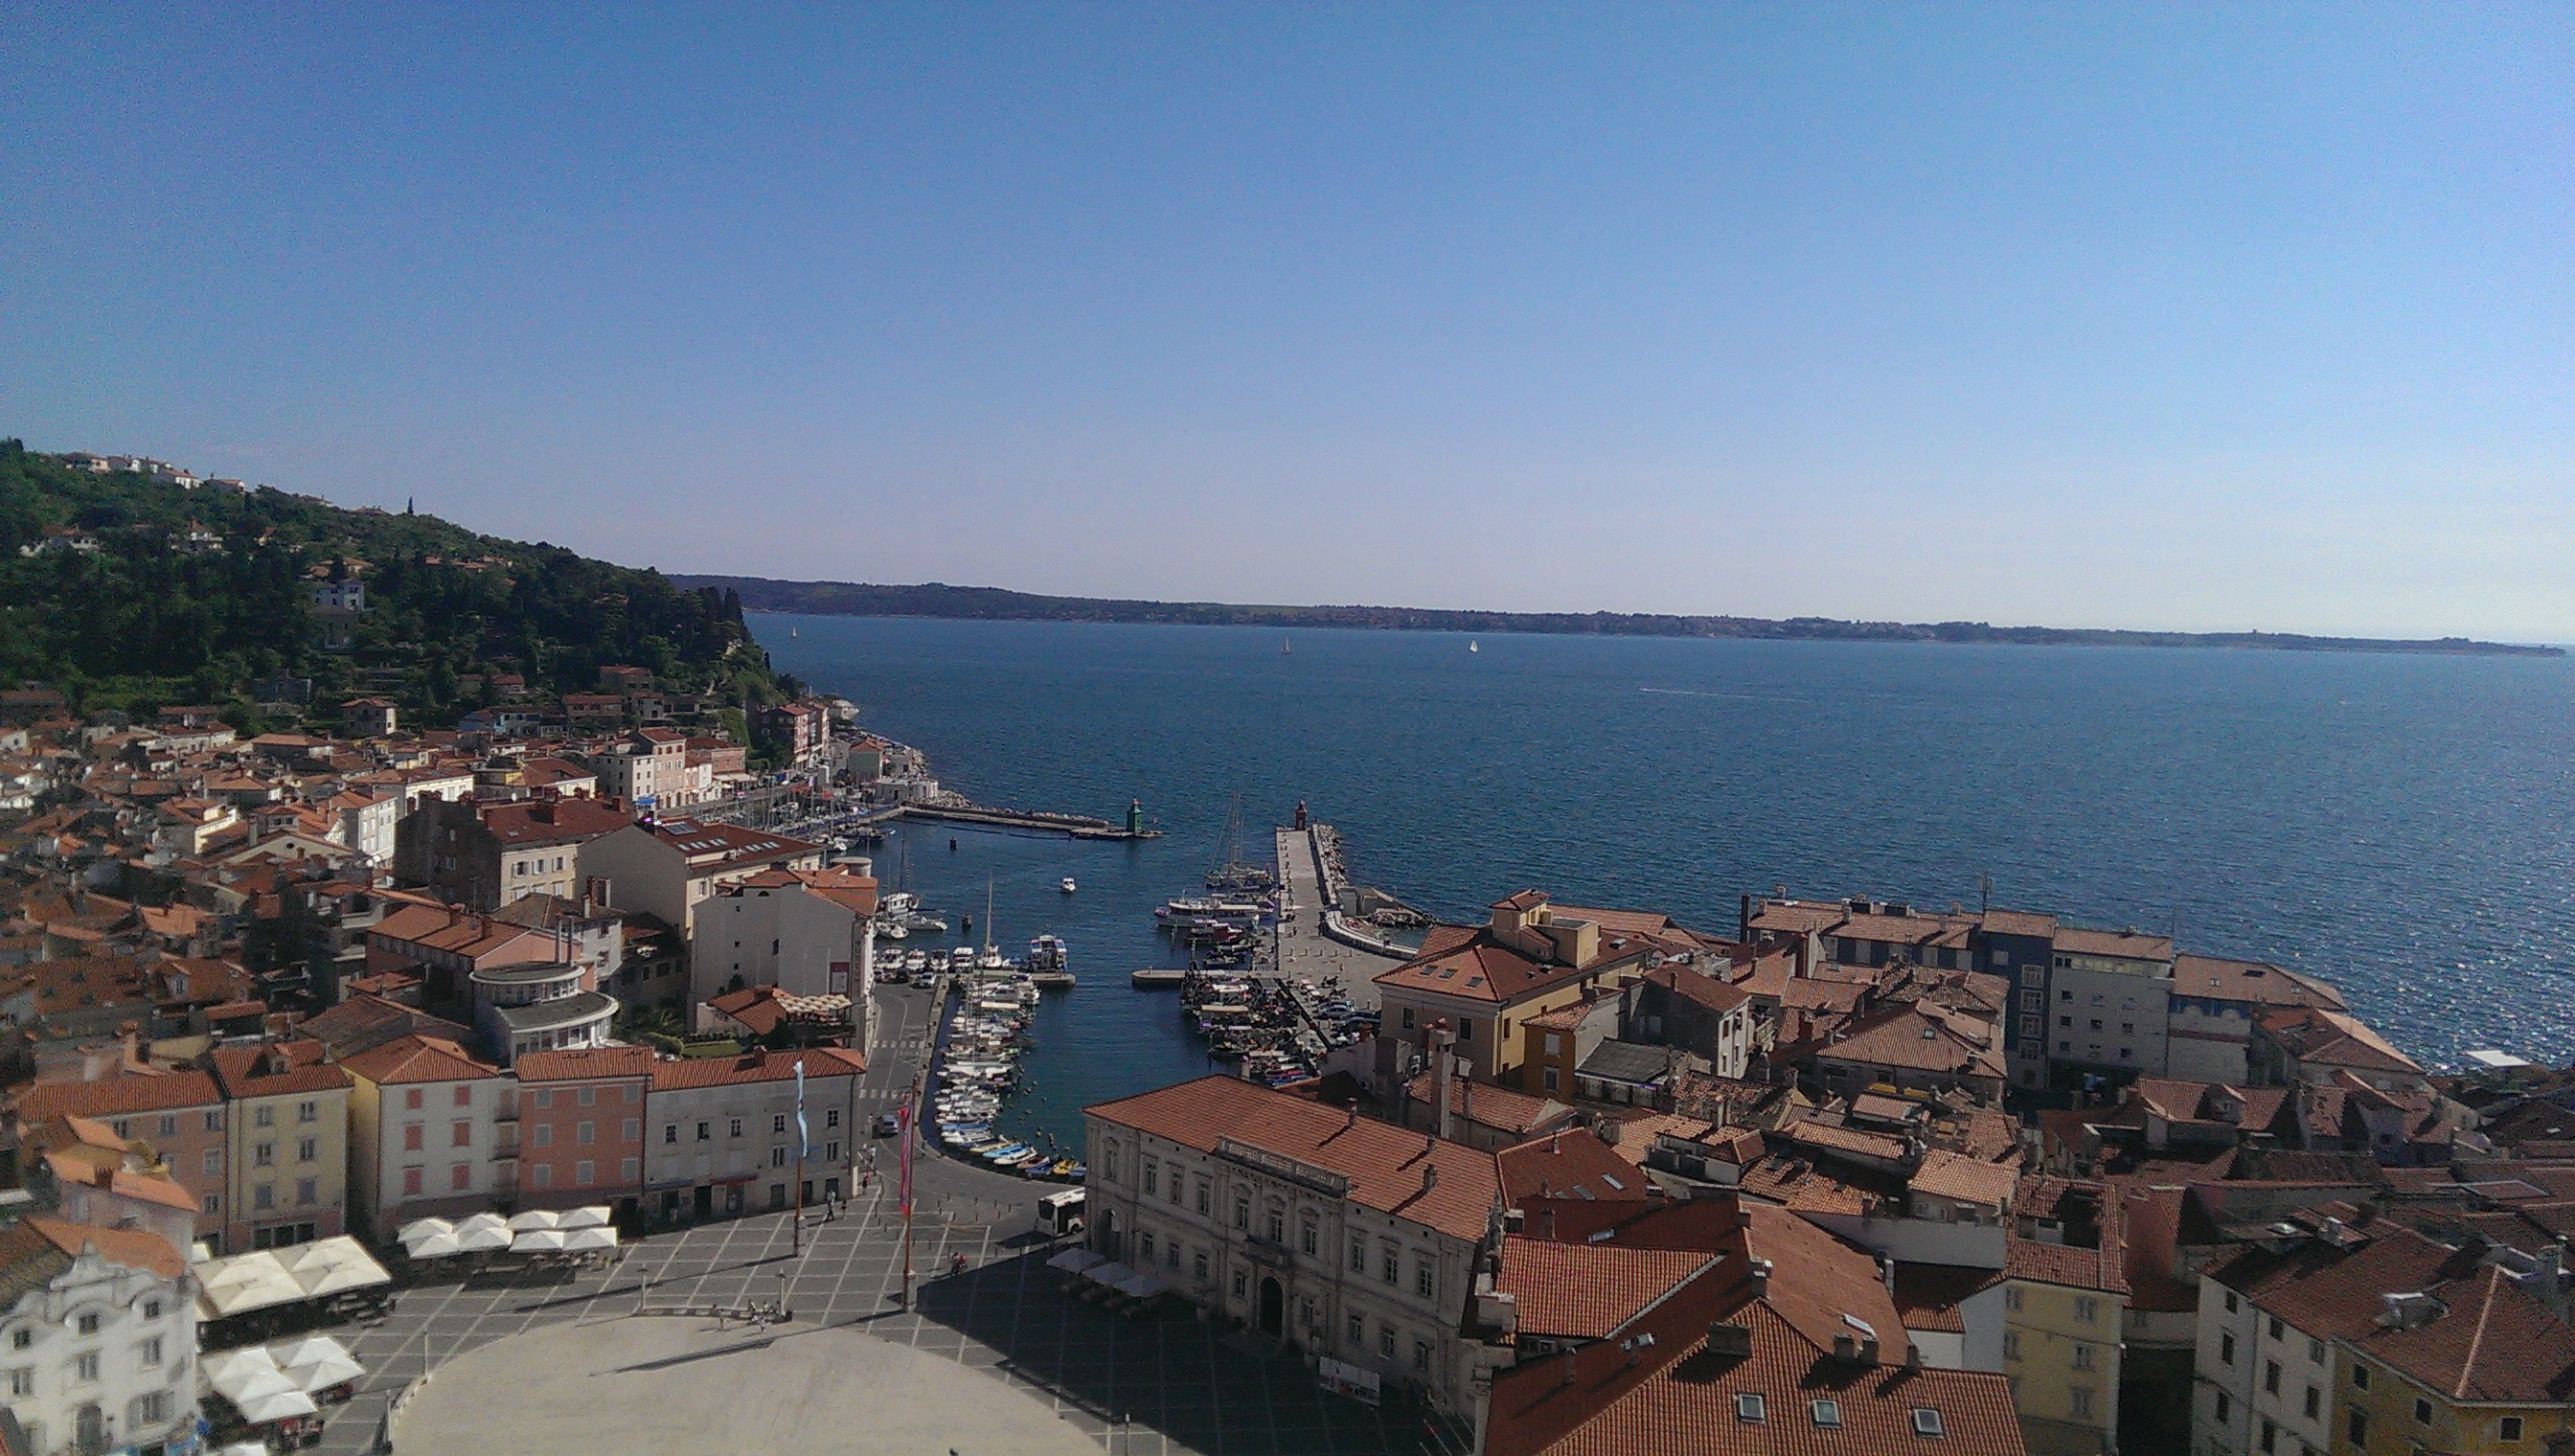 The view over Piran